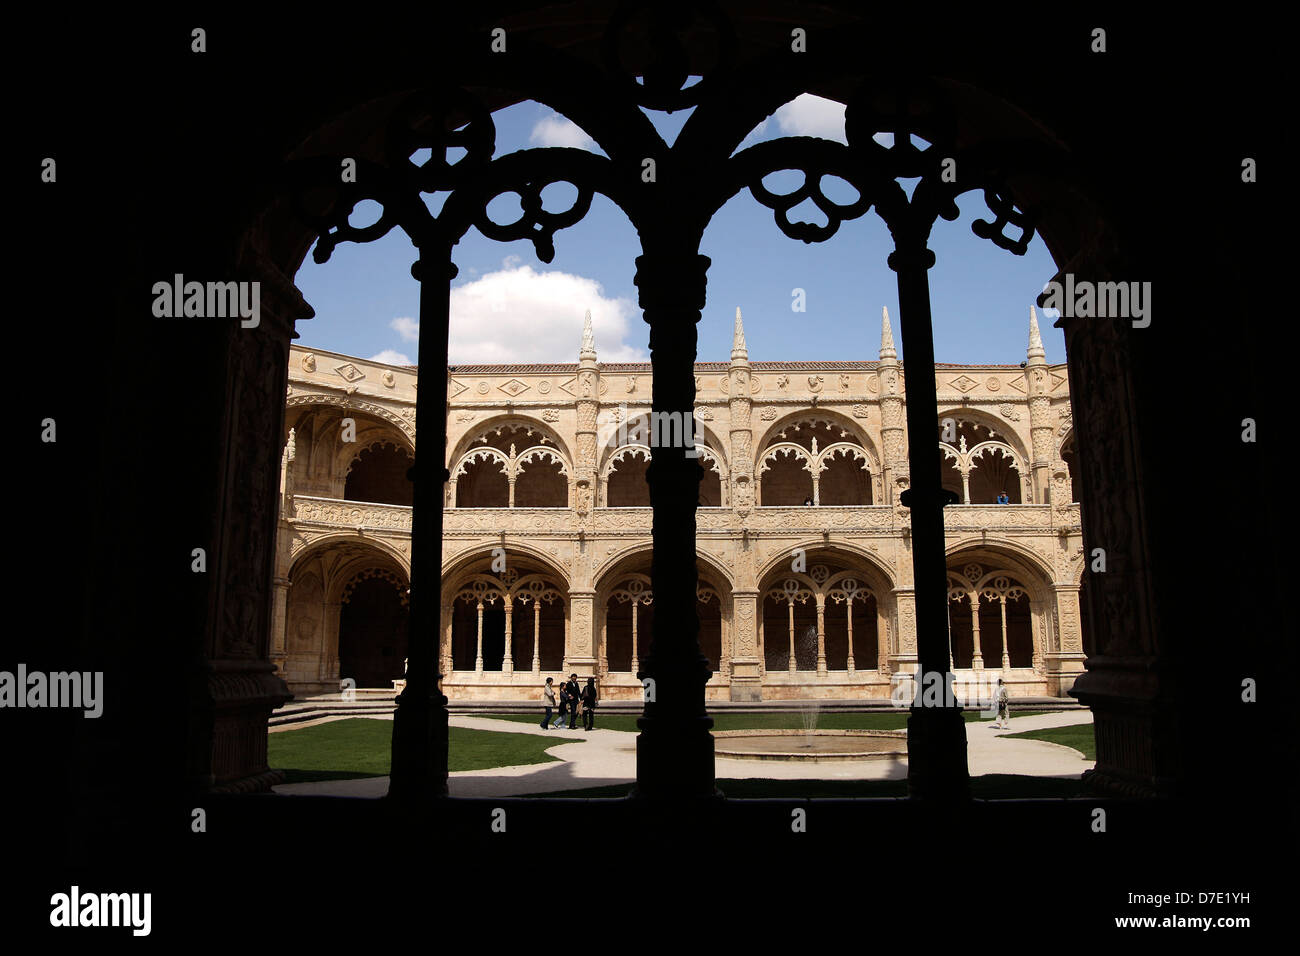 Decorated cloister arches at Jeronimos Monastery Mosteiro dos Jerominos in Belem, Lisbon, , Europe Stock Photo